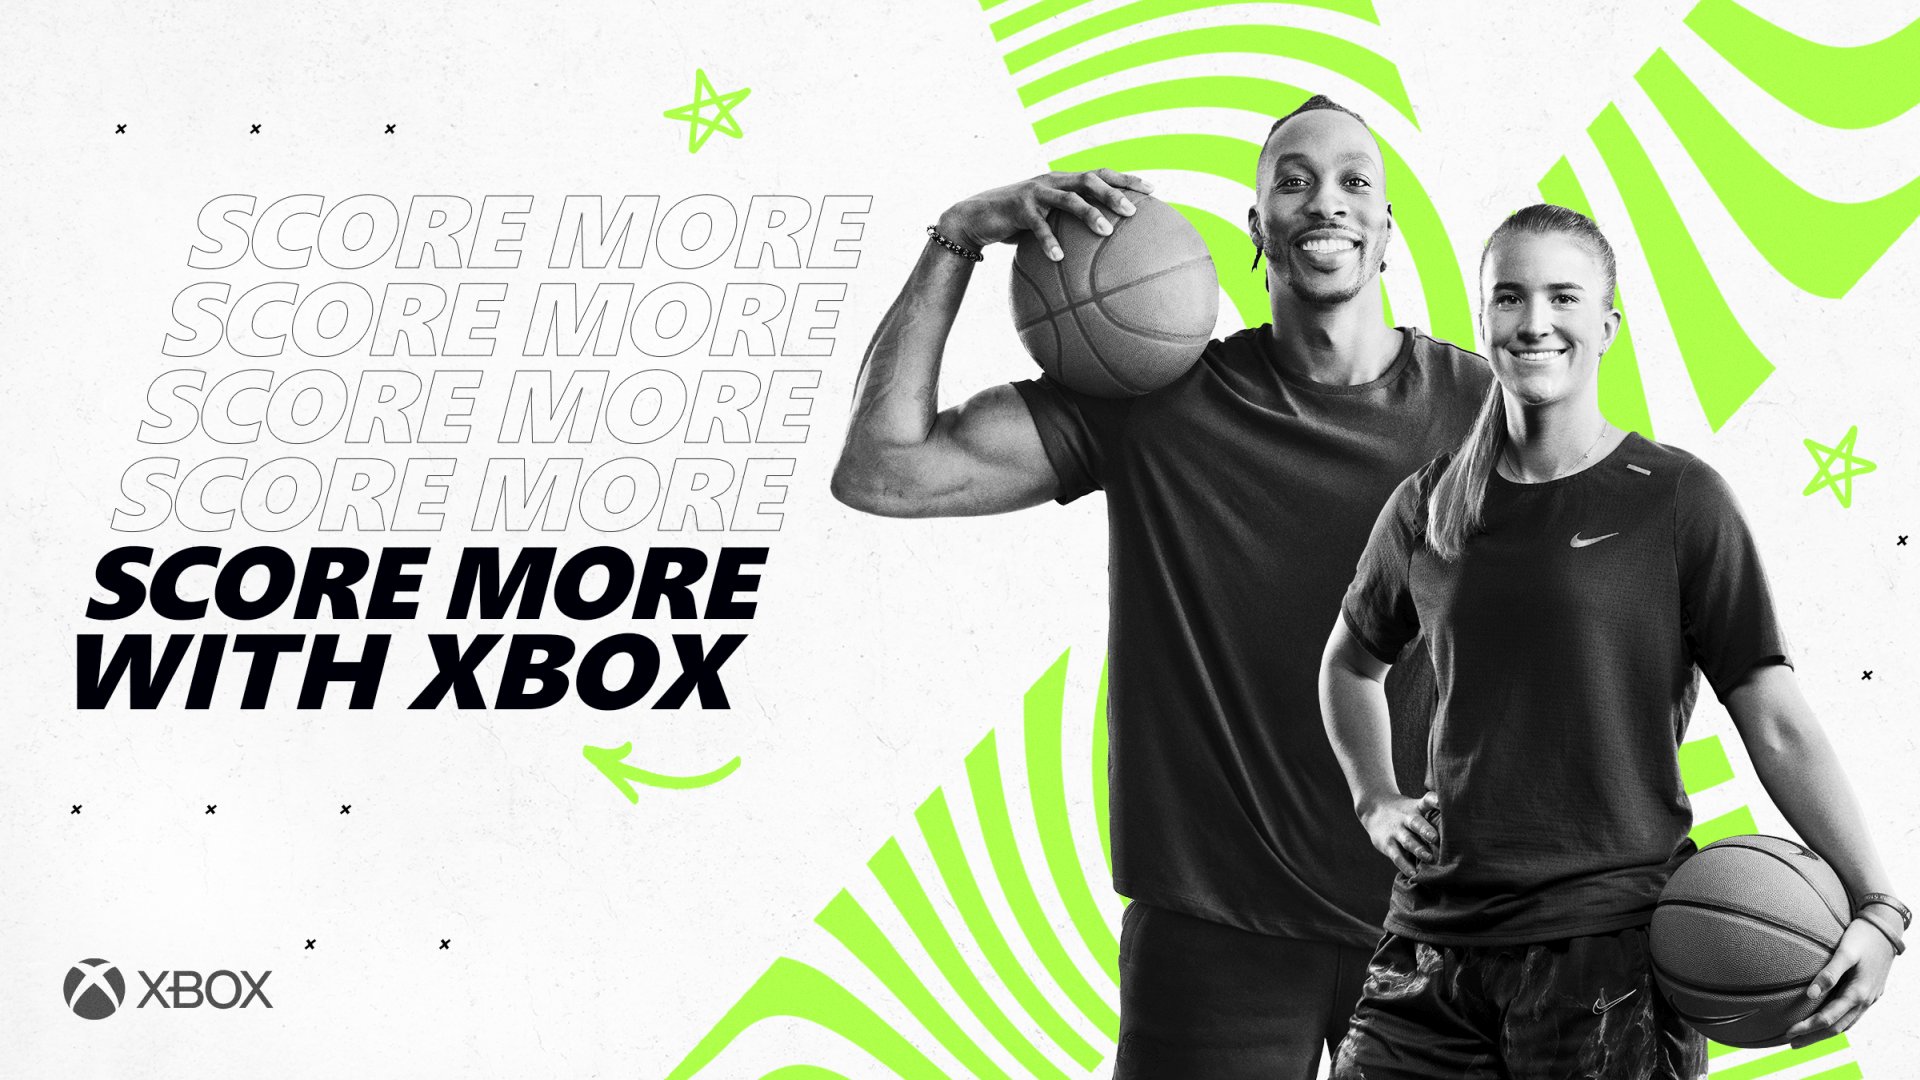 Score More with Xbox to Earn Rewards, Prizes and More